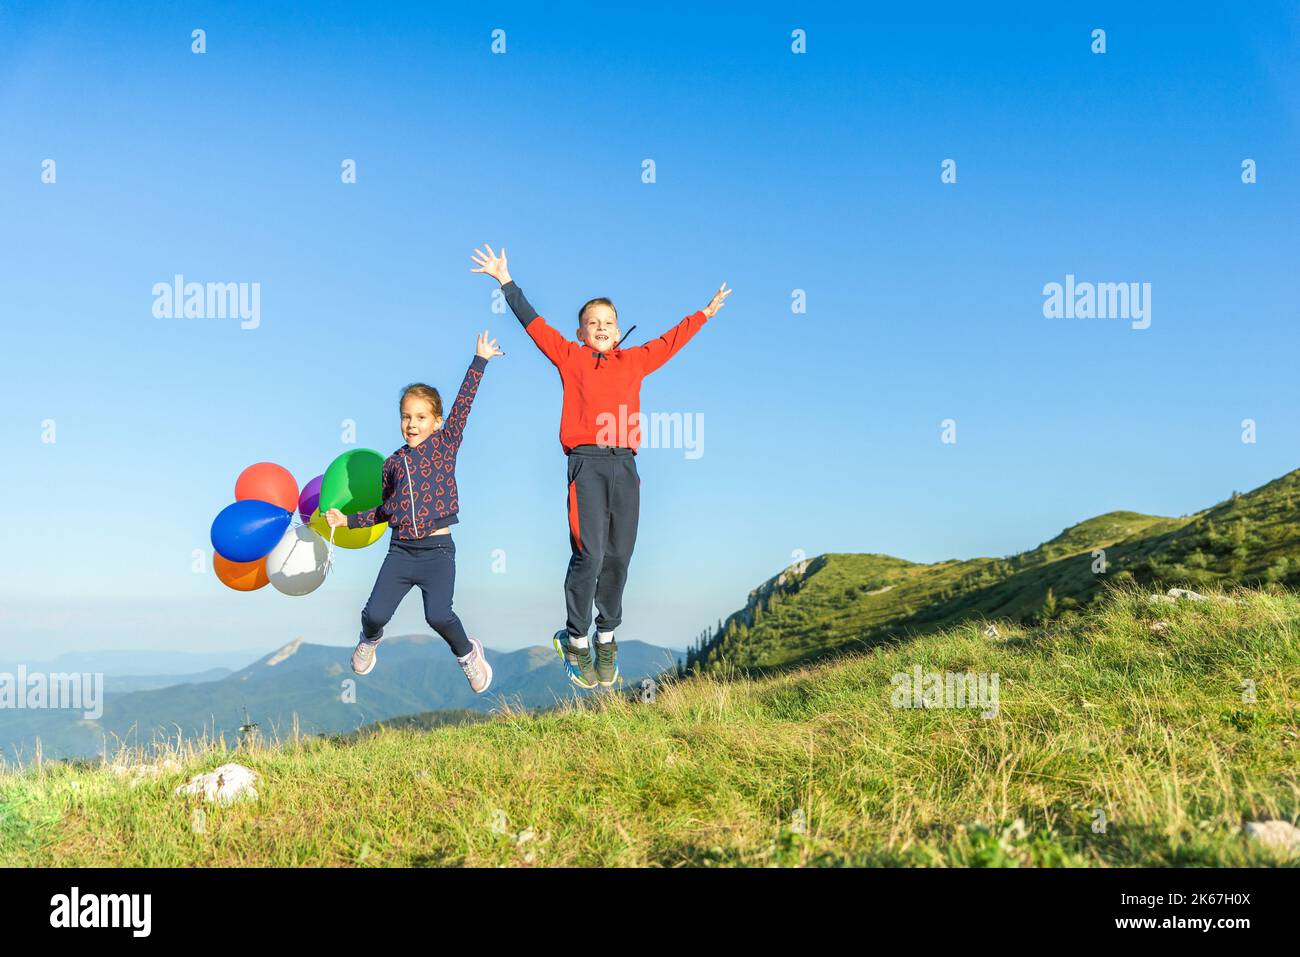 Children jump with balloons in hand that sway in the wind. Mountain peaks and blue sky in background. Children's play, freedom and happiness Stock Photo